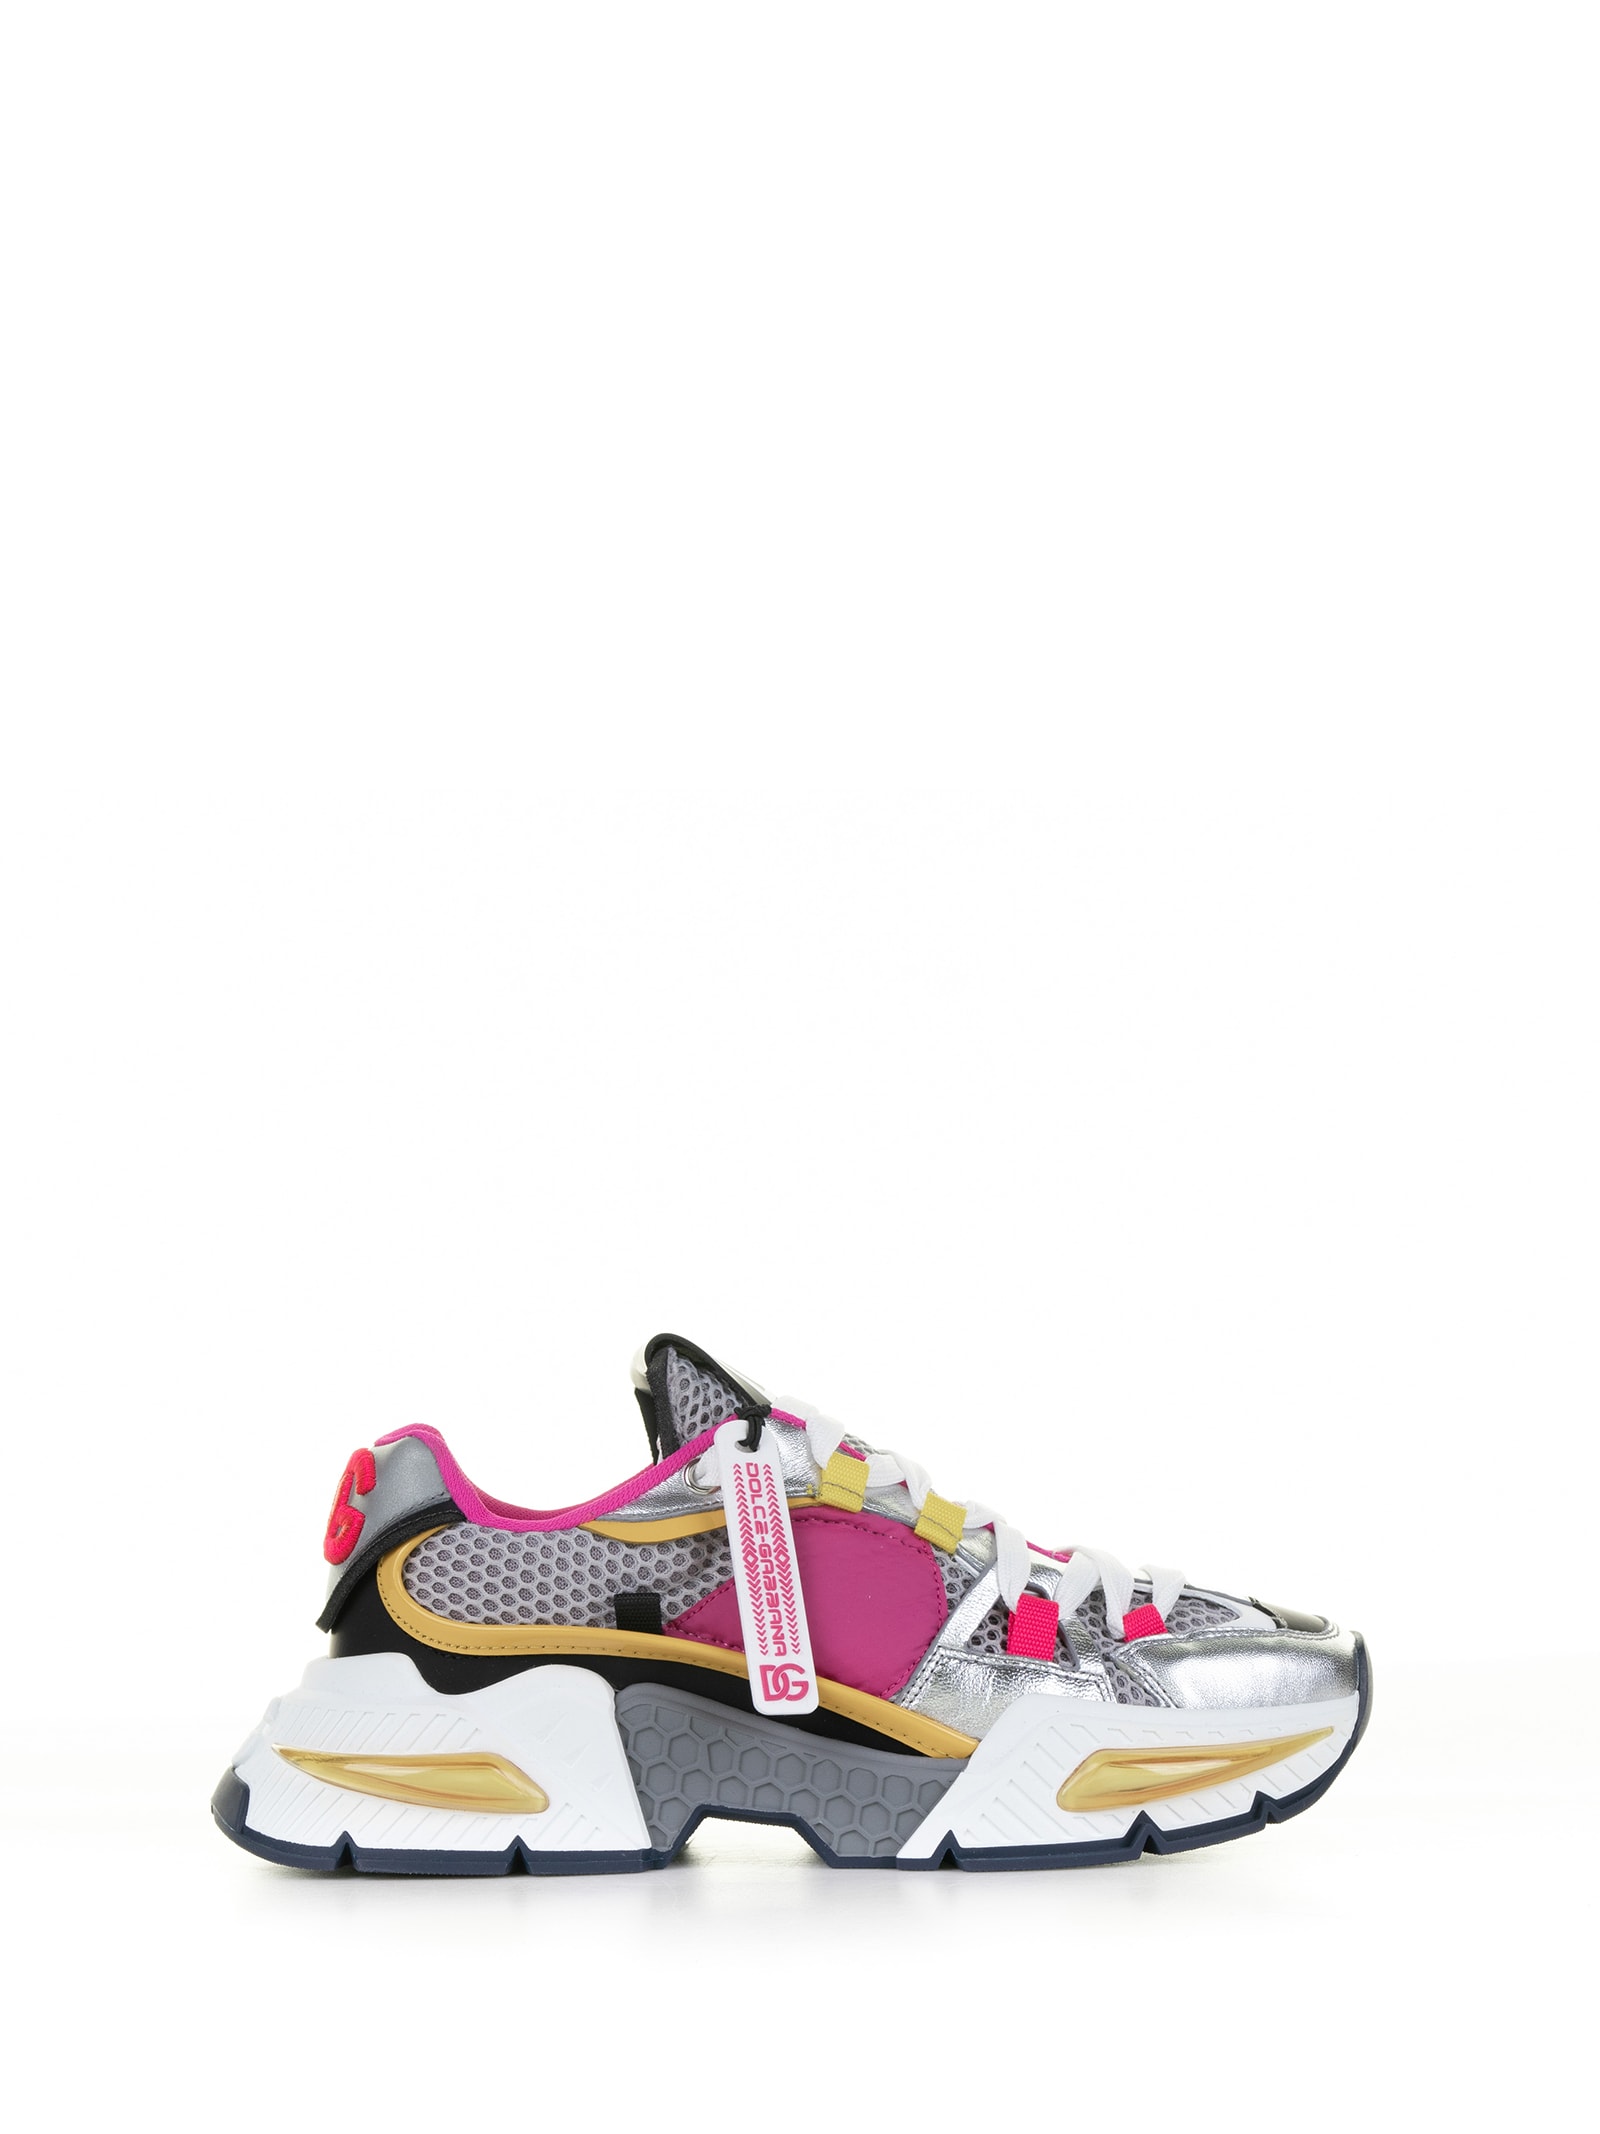 Dolce & Gabbana Daymaster Sneaker In Multicolored Leather